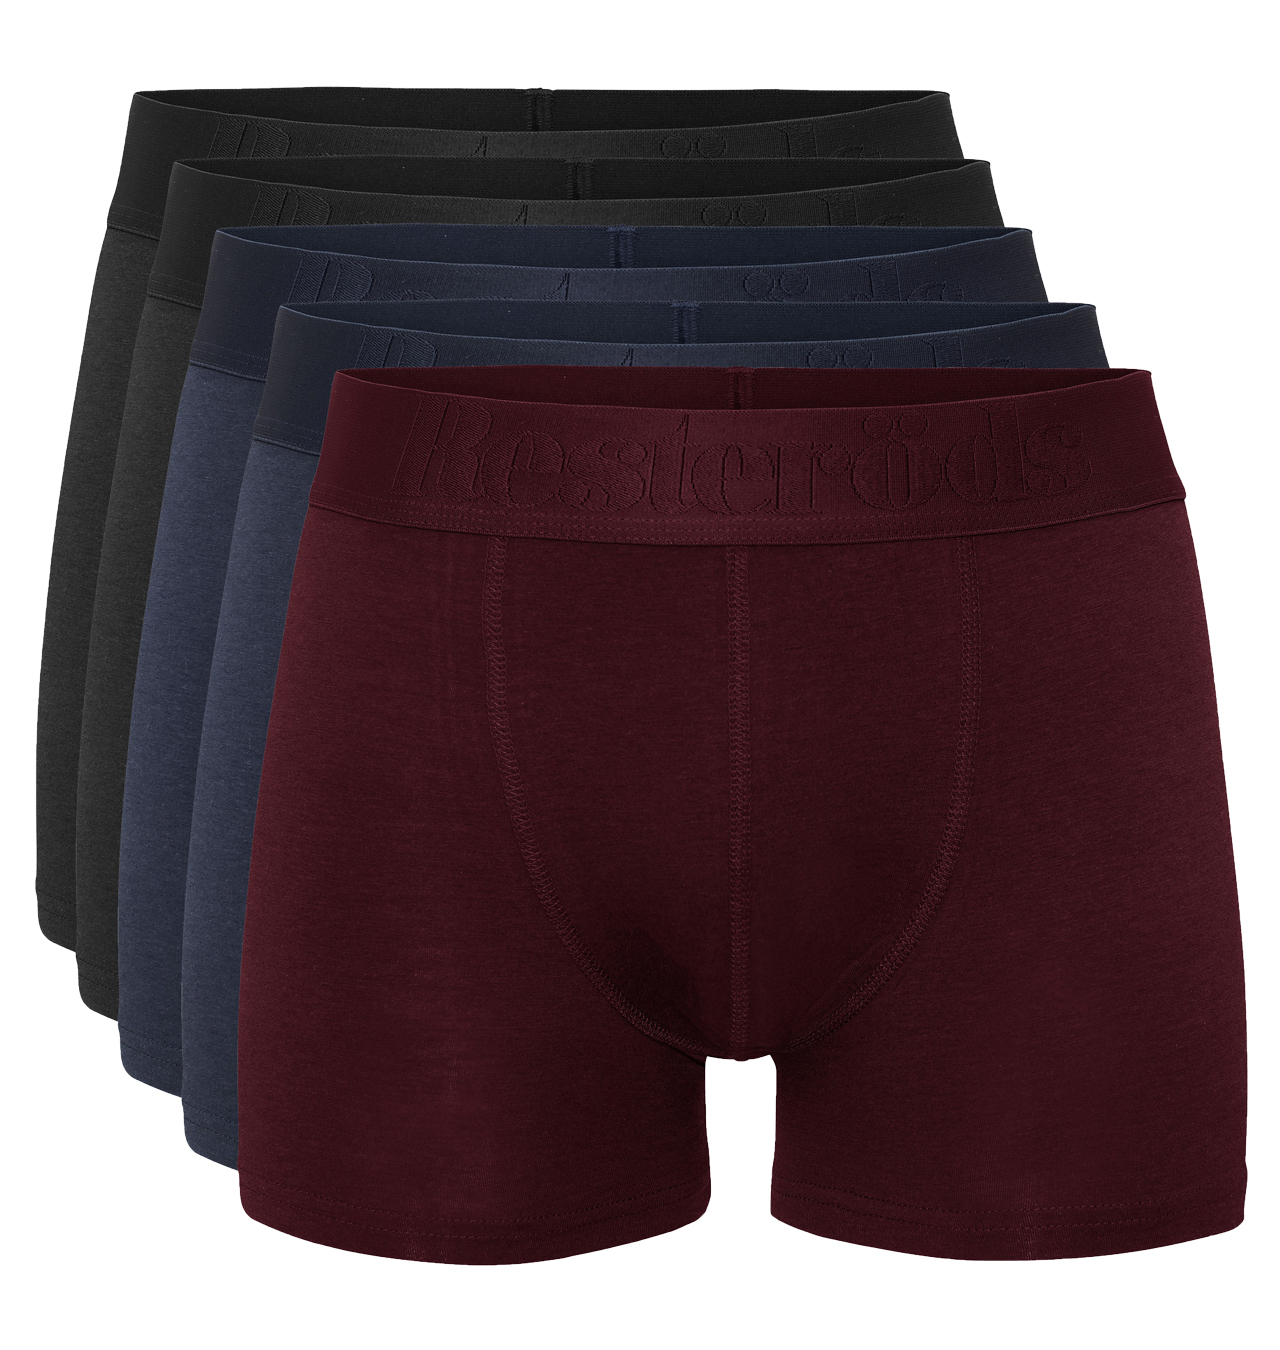 Resterods---Boxer-Bamboo-5-Pack---Multi-33-11